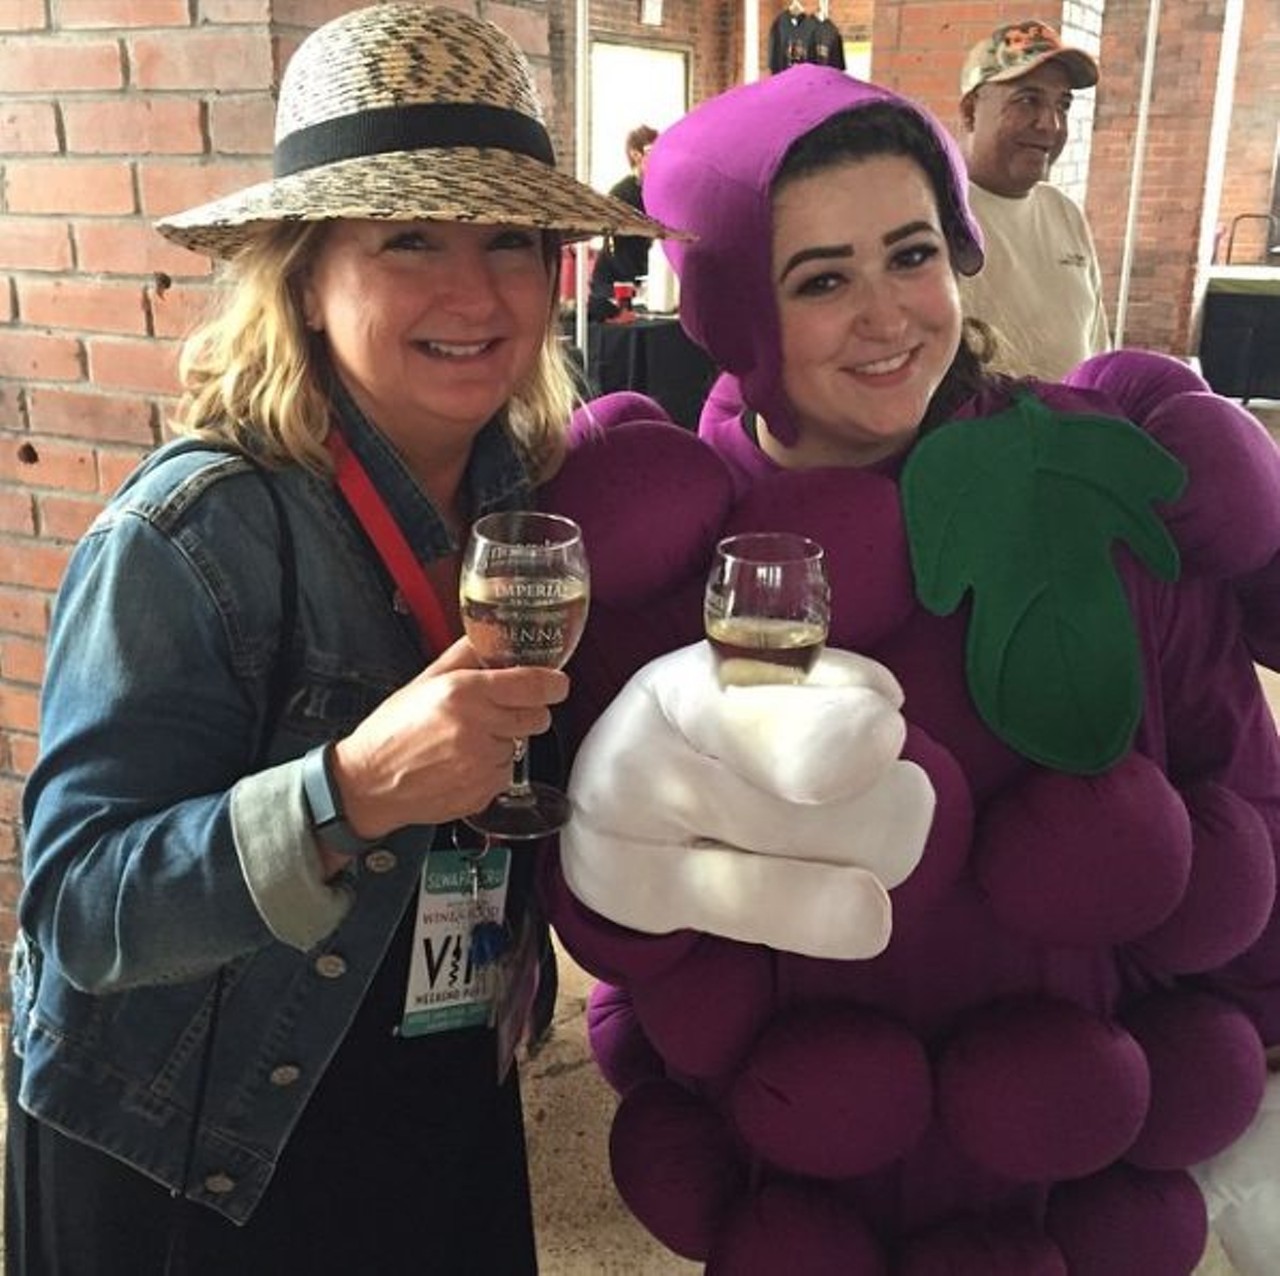 Sugar Land Wine & Food Affair
April 6-9, Multiple locations, Houston, sugarlandwineandfoodaffair.com
This Houston suburbs&#146; festival offers packages ranging from casual wine tastings to grand dinners.
Photo via Instagram, slwinefood